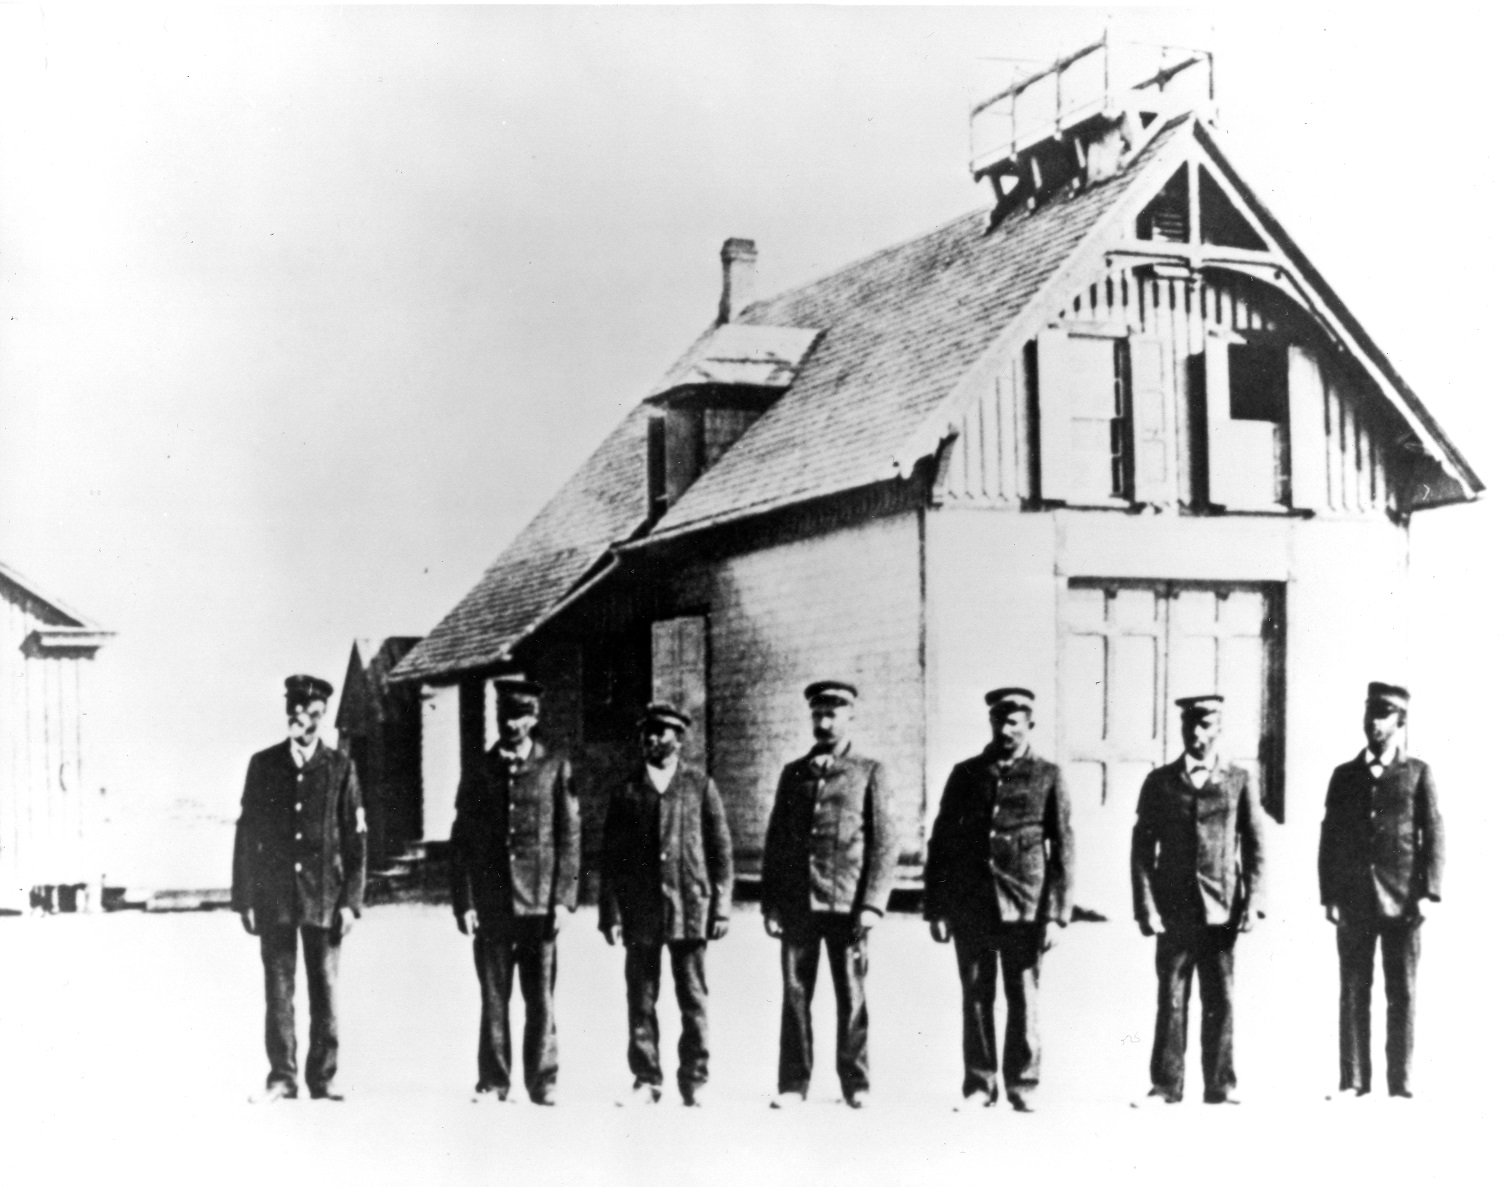 Rare photo showing the heroic Pea Island Lifesaving Station crew commanded by famed African American keeper Richard Etheridge. (Coast Guard Collection)